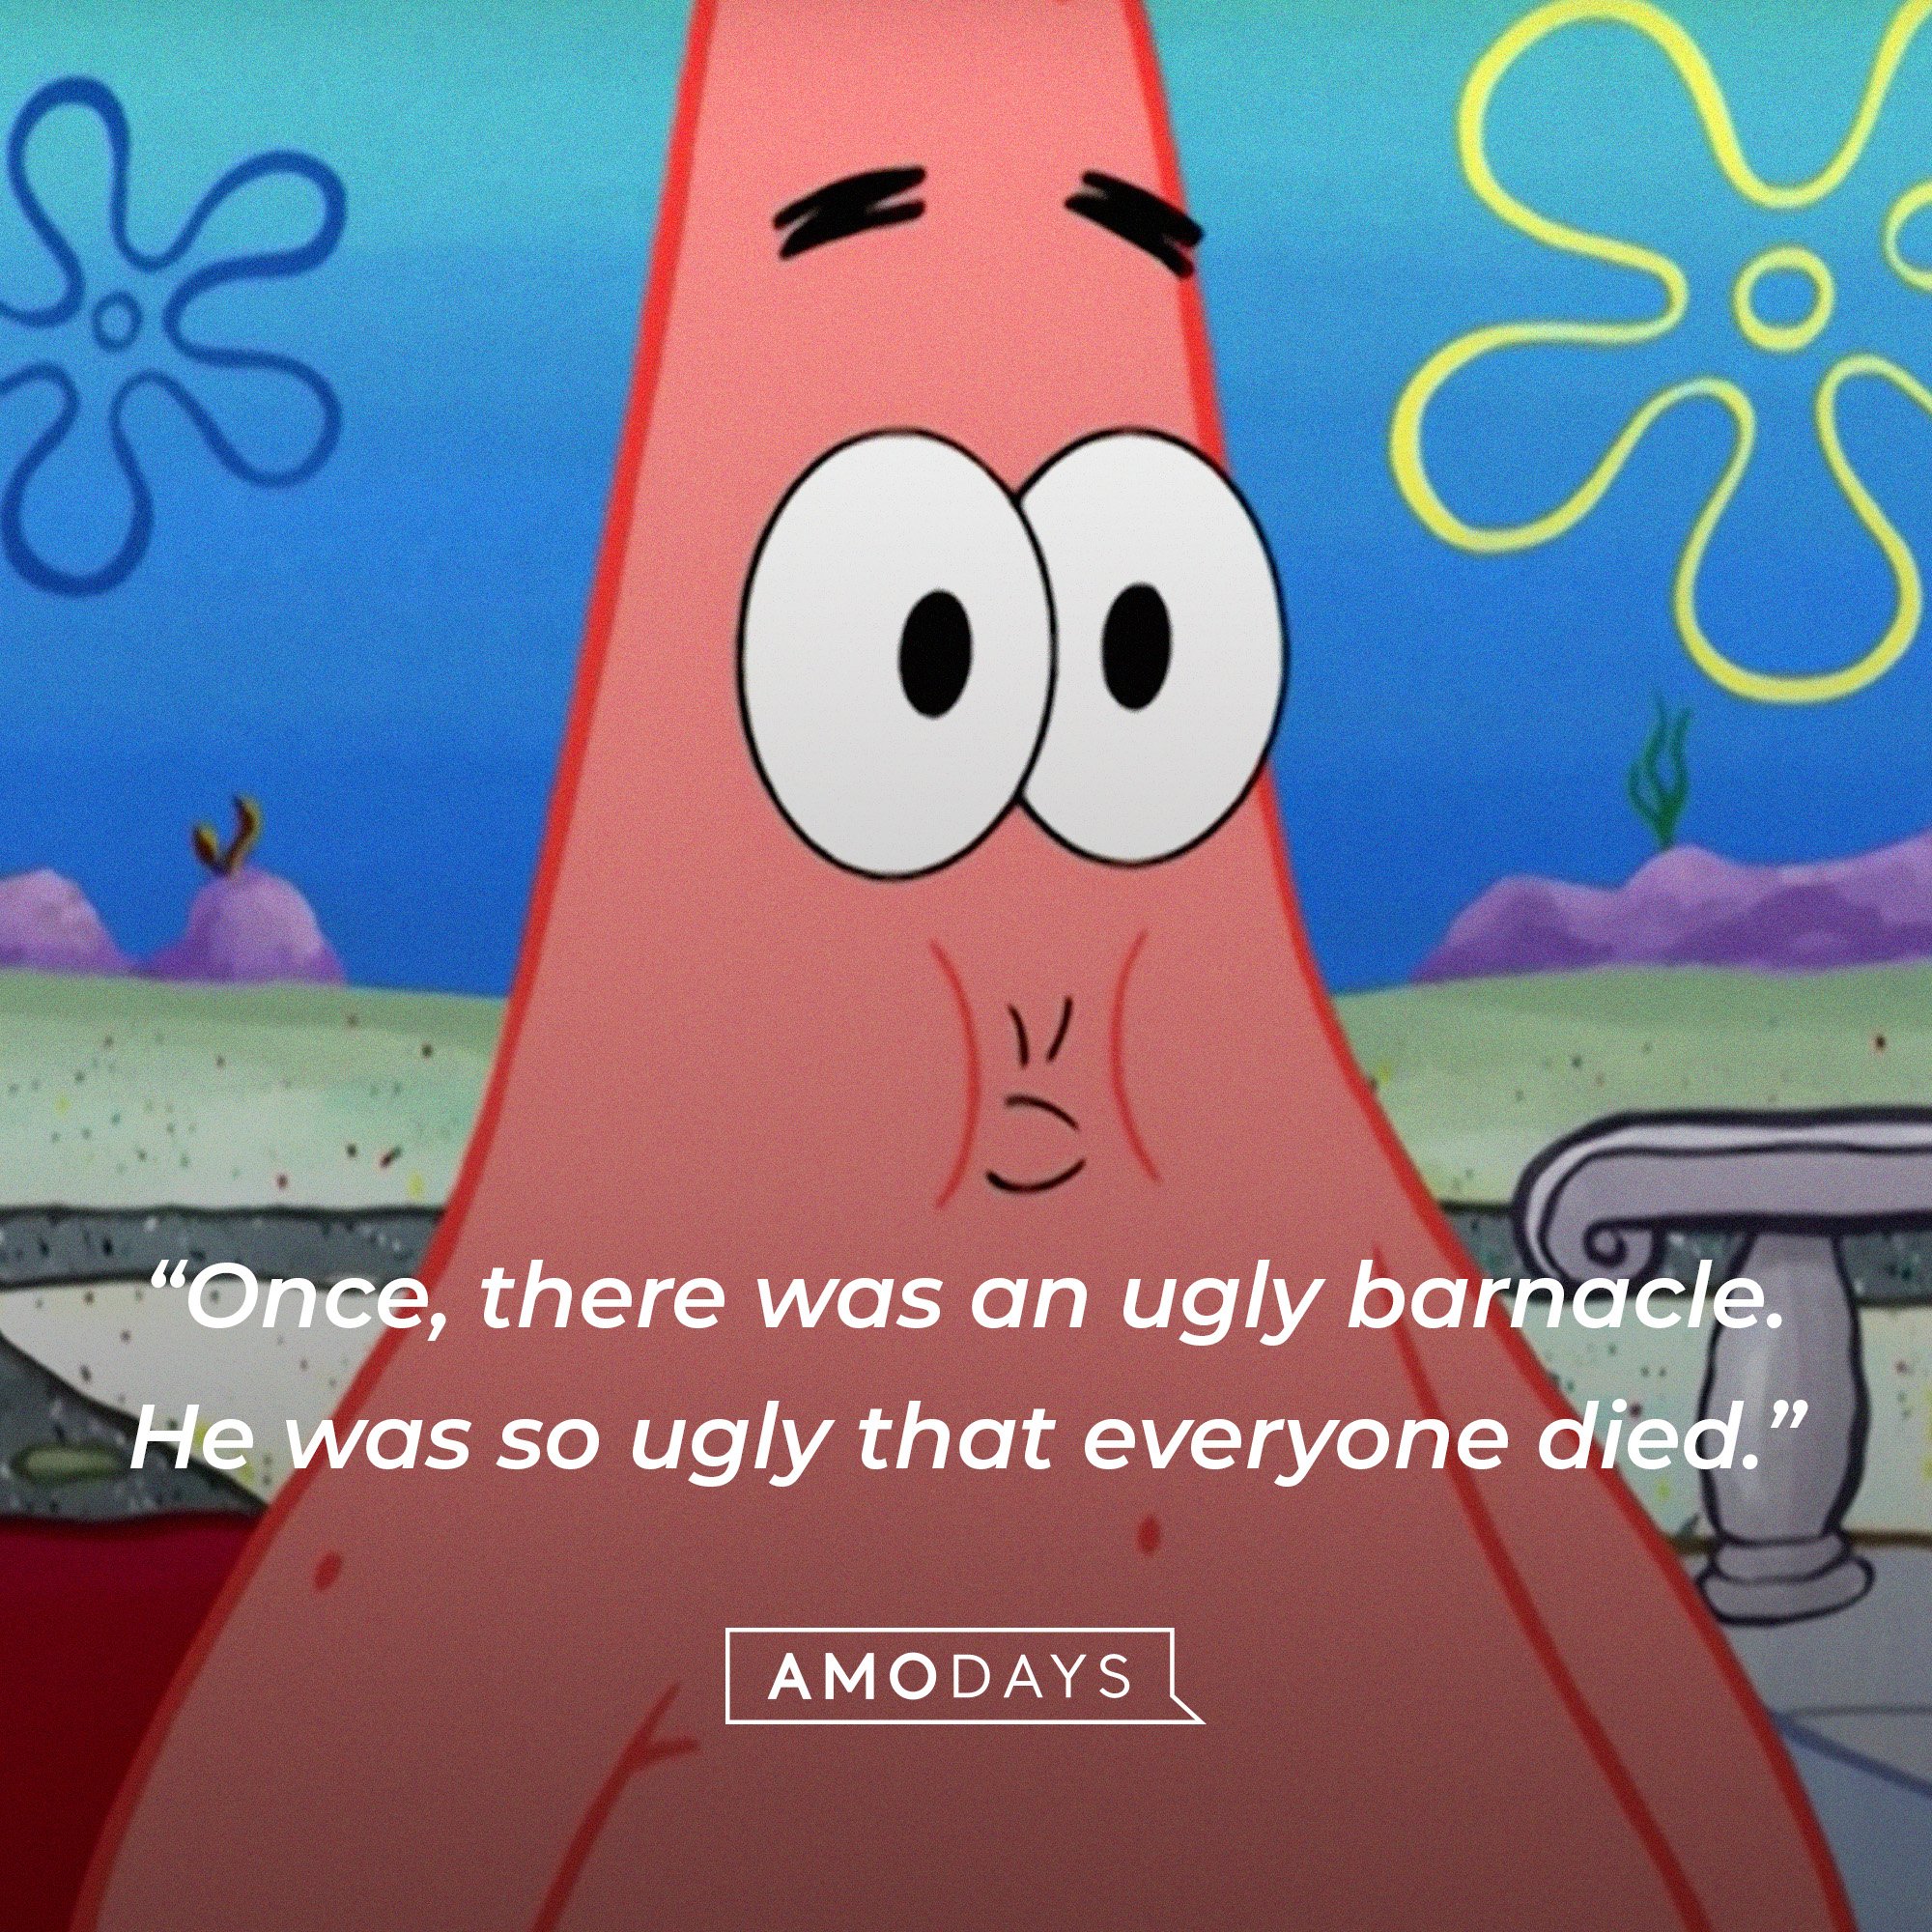 Patrick Star’s quote: “Once, there was an ugly barnacle. He was so ugly that everyone died.” | Image: AmoDays